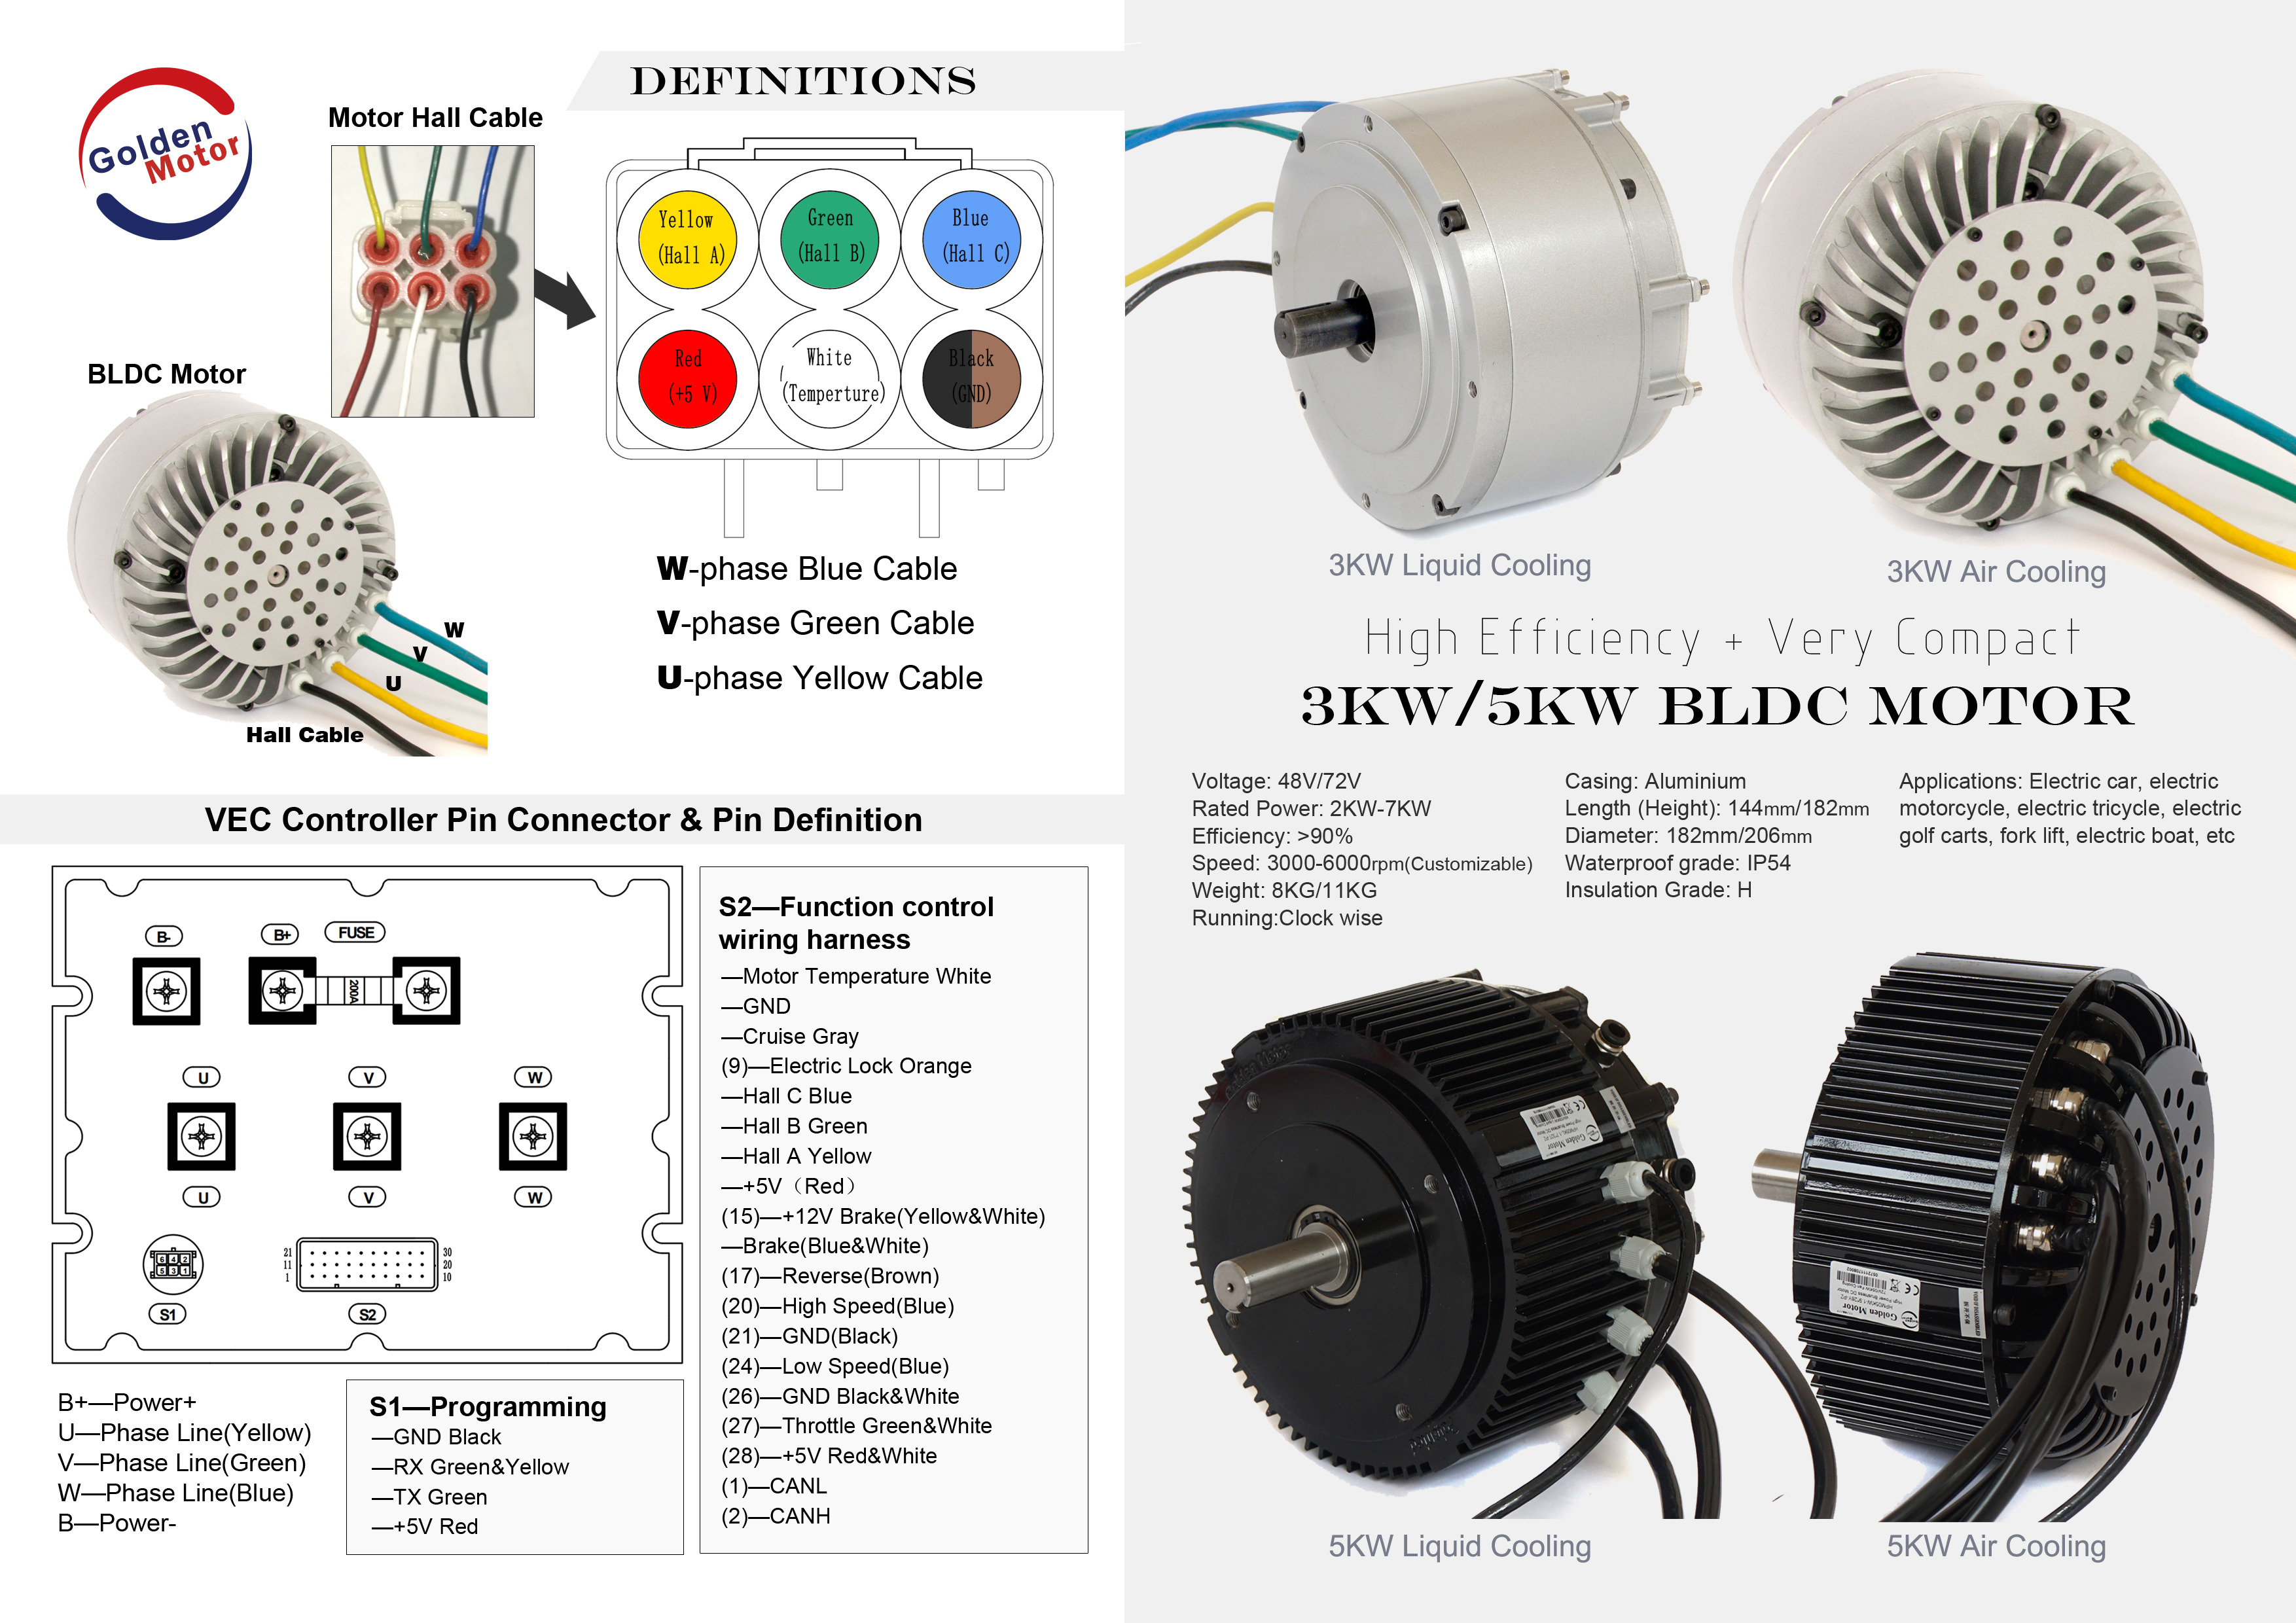 5 KW BLDC Motor Air Cooled - Golden Motor North America - Canada